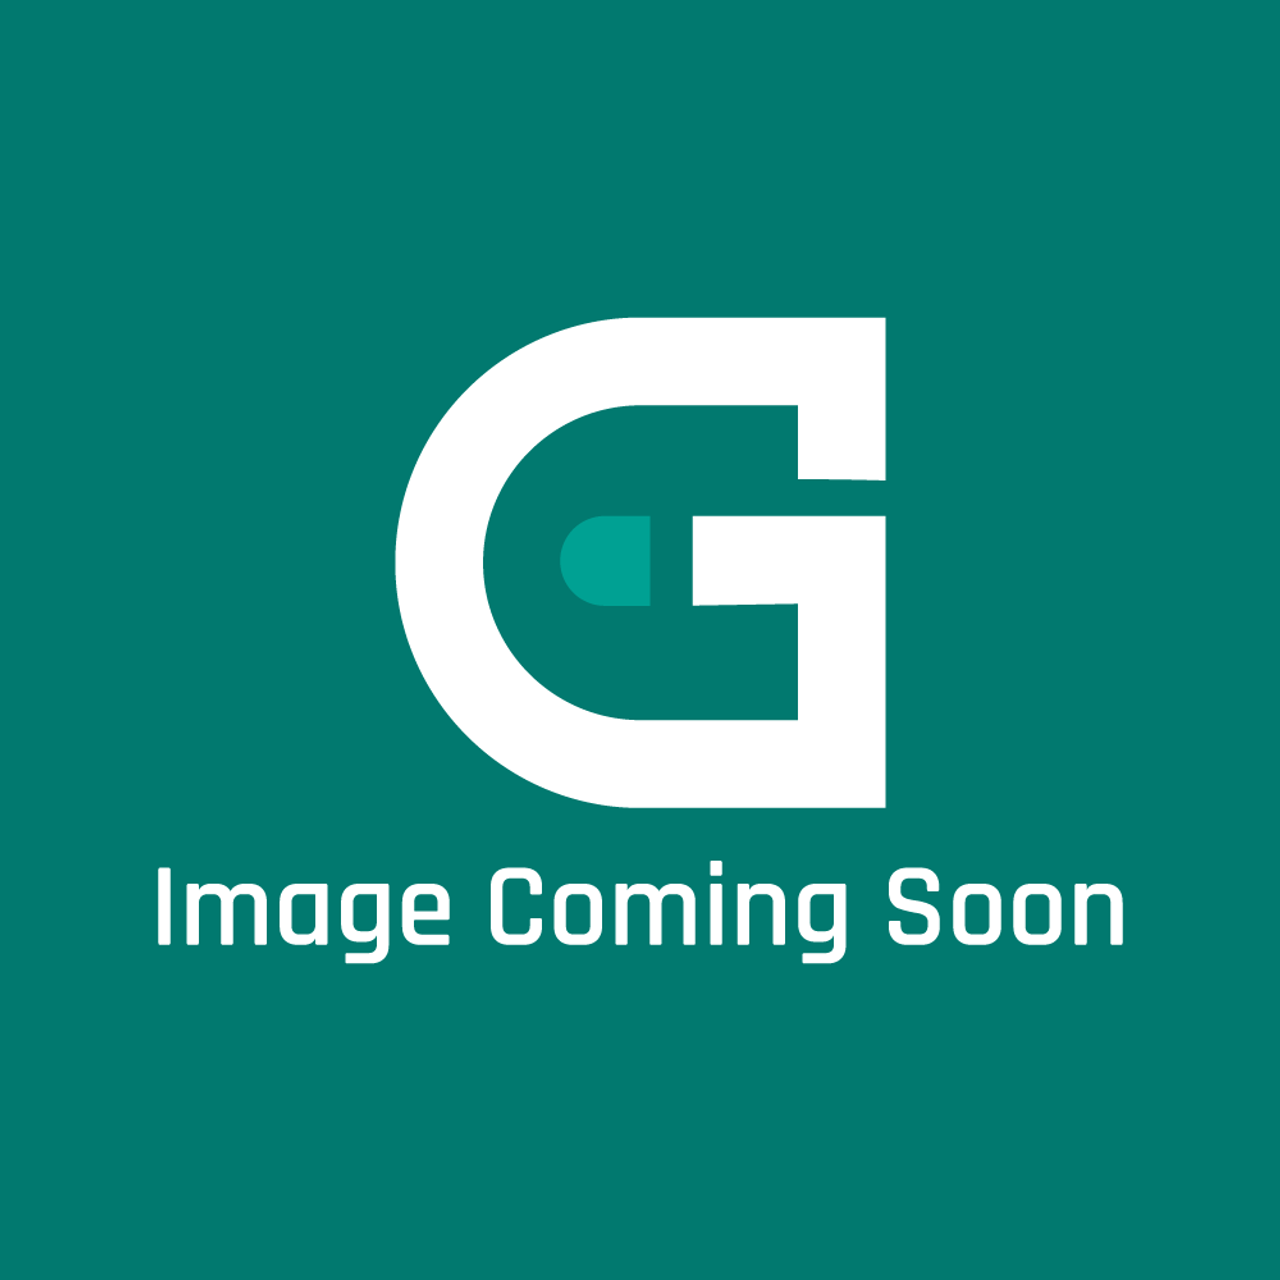 Frigidaire - Electrolux 316456565 Panel - Image Coming Soon!